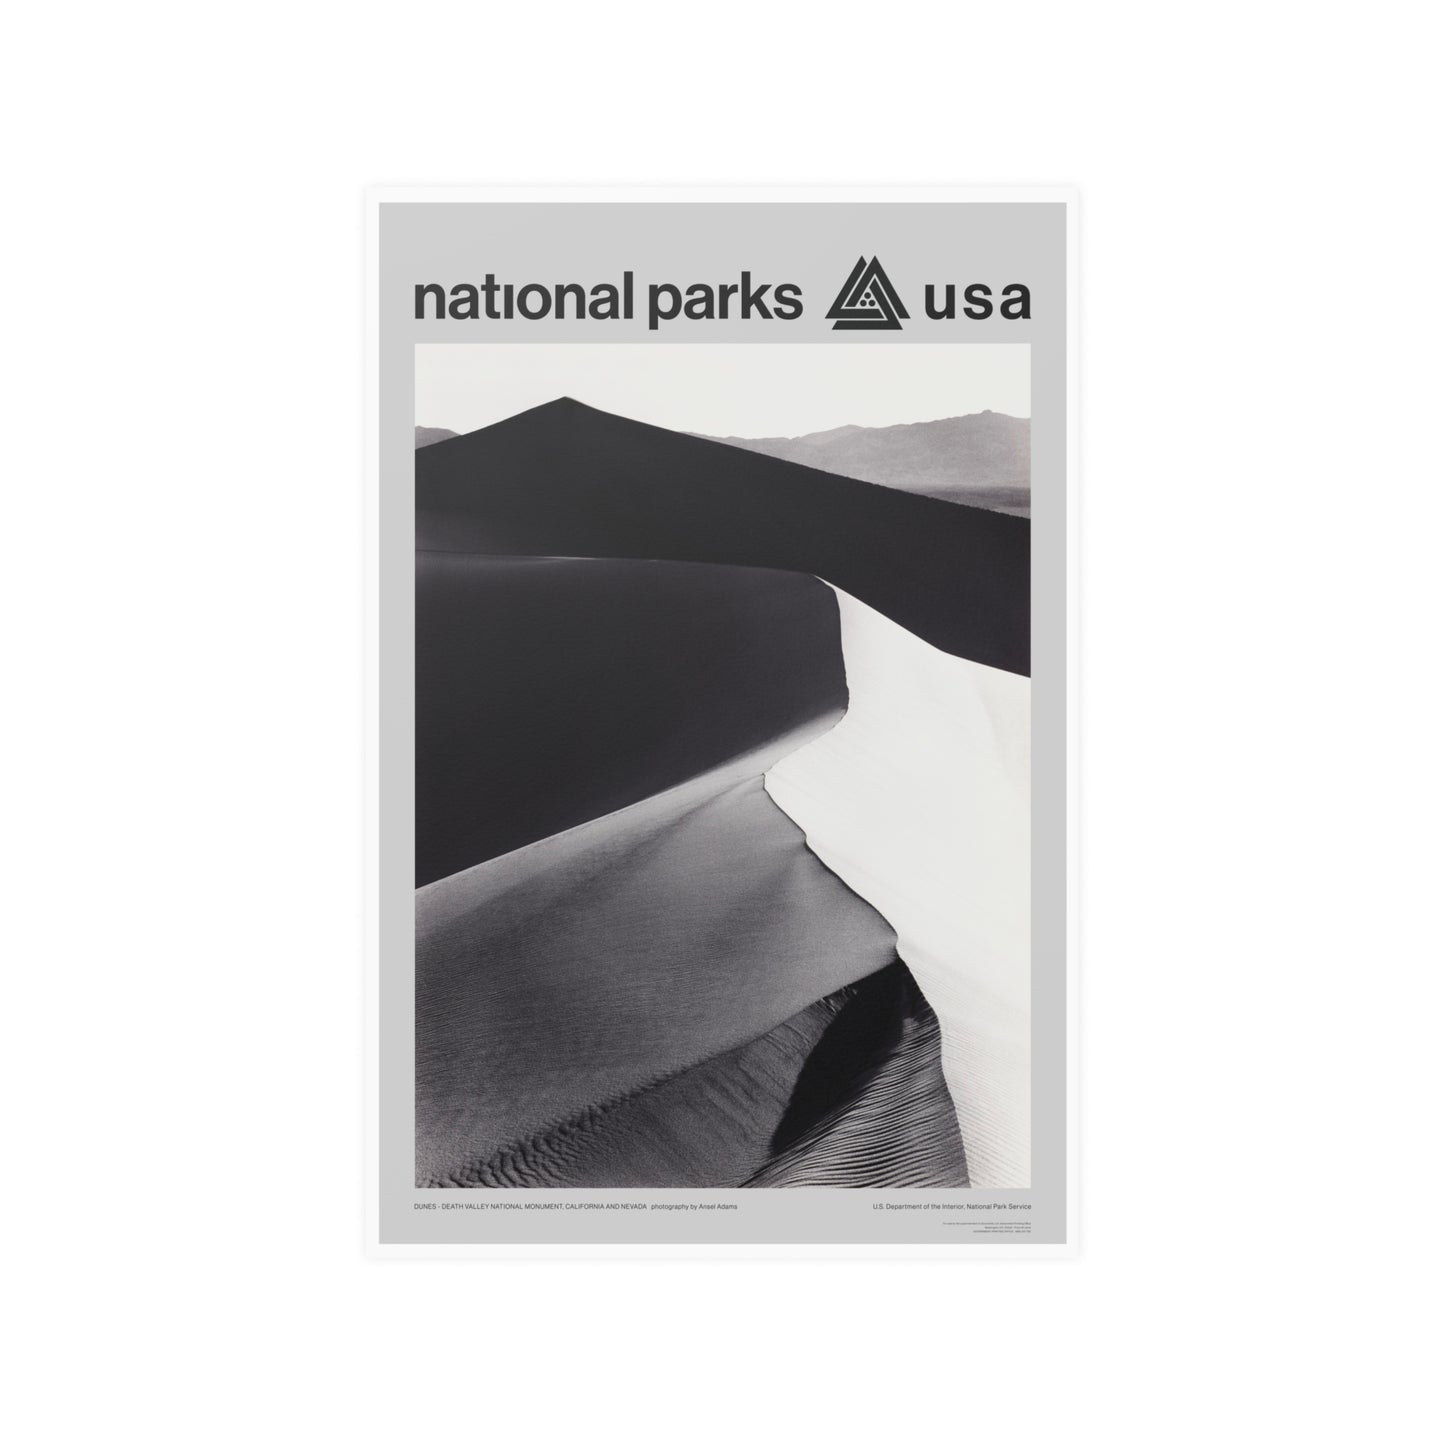 Death Valley National Park Poster - Ansel Adams